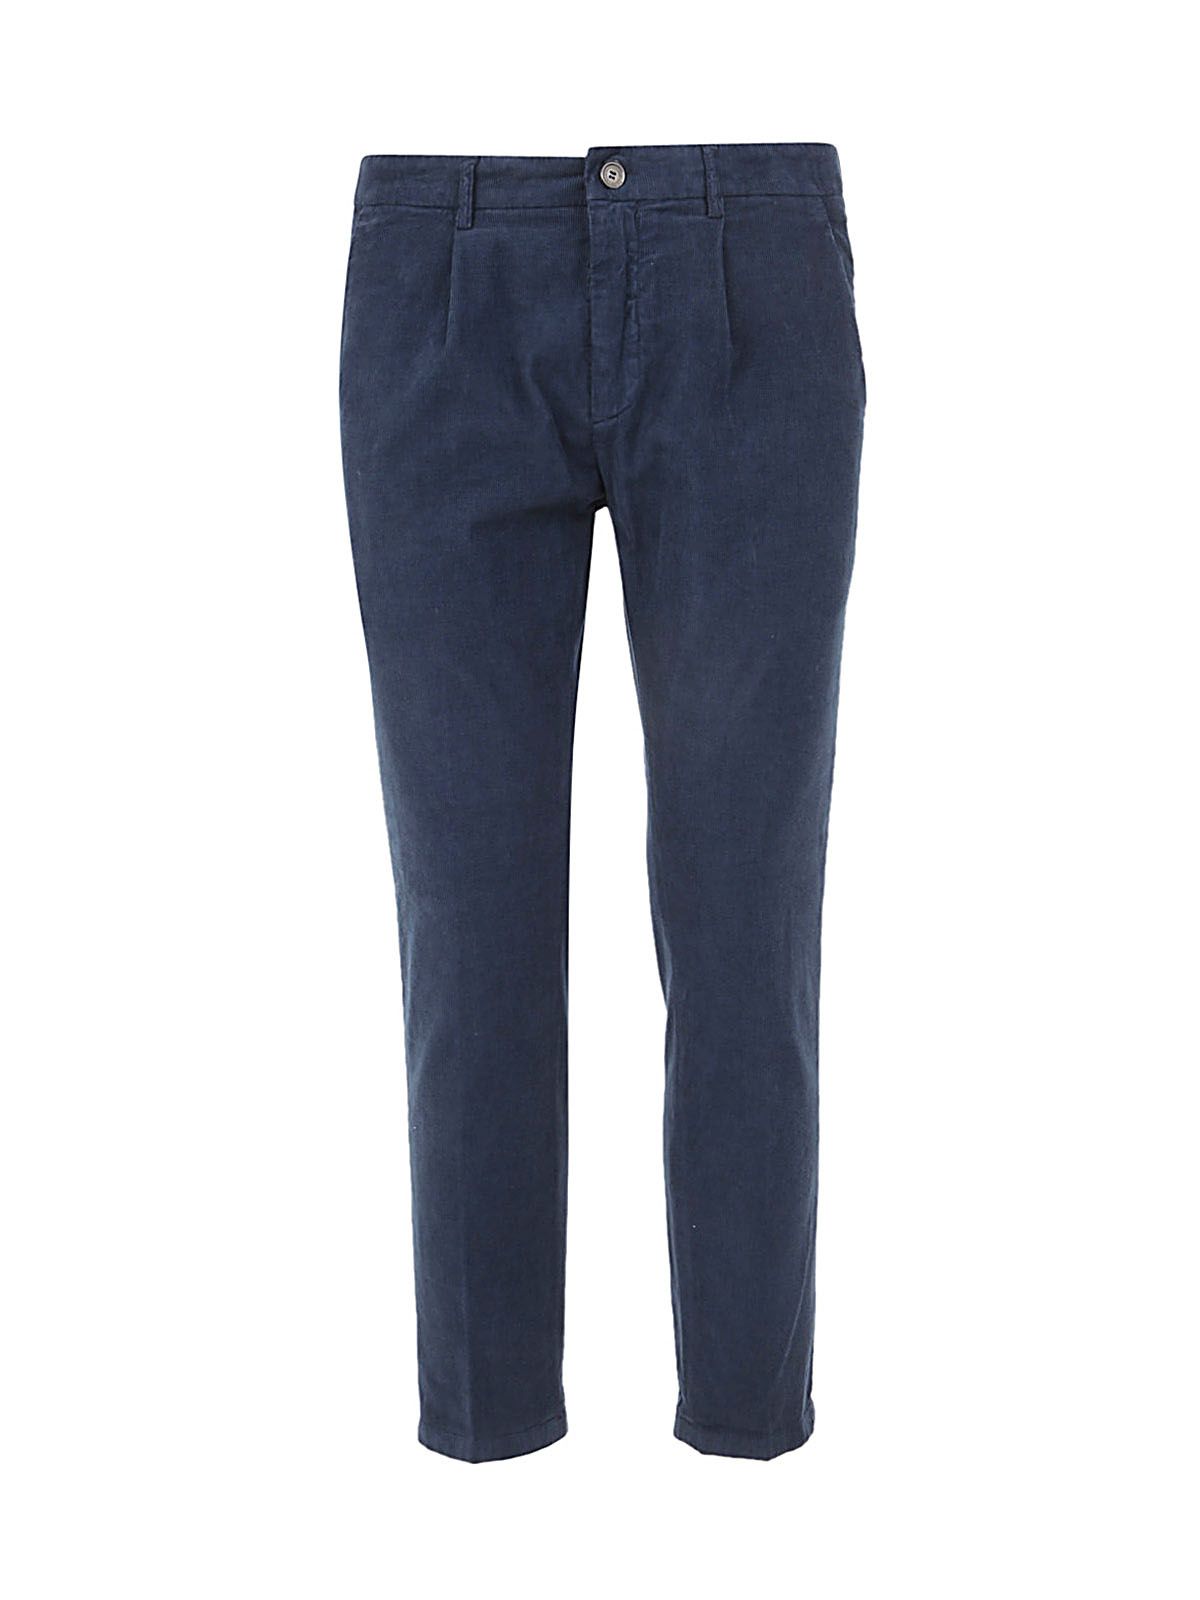 Department Five Prince Chinos Trouserswith Pences In Velvet